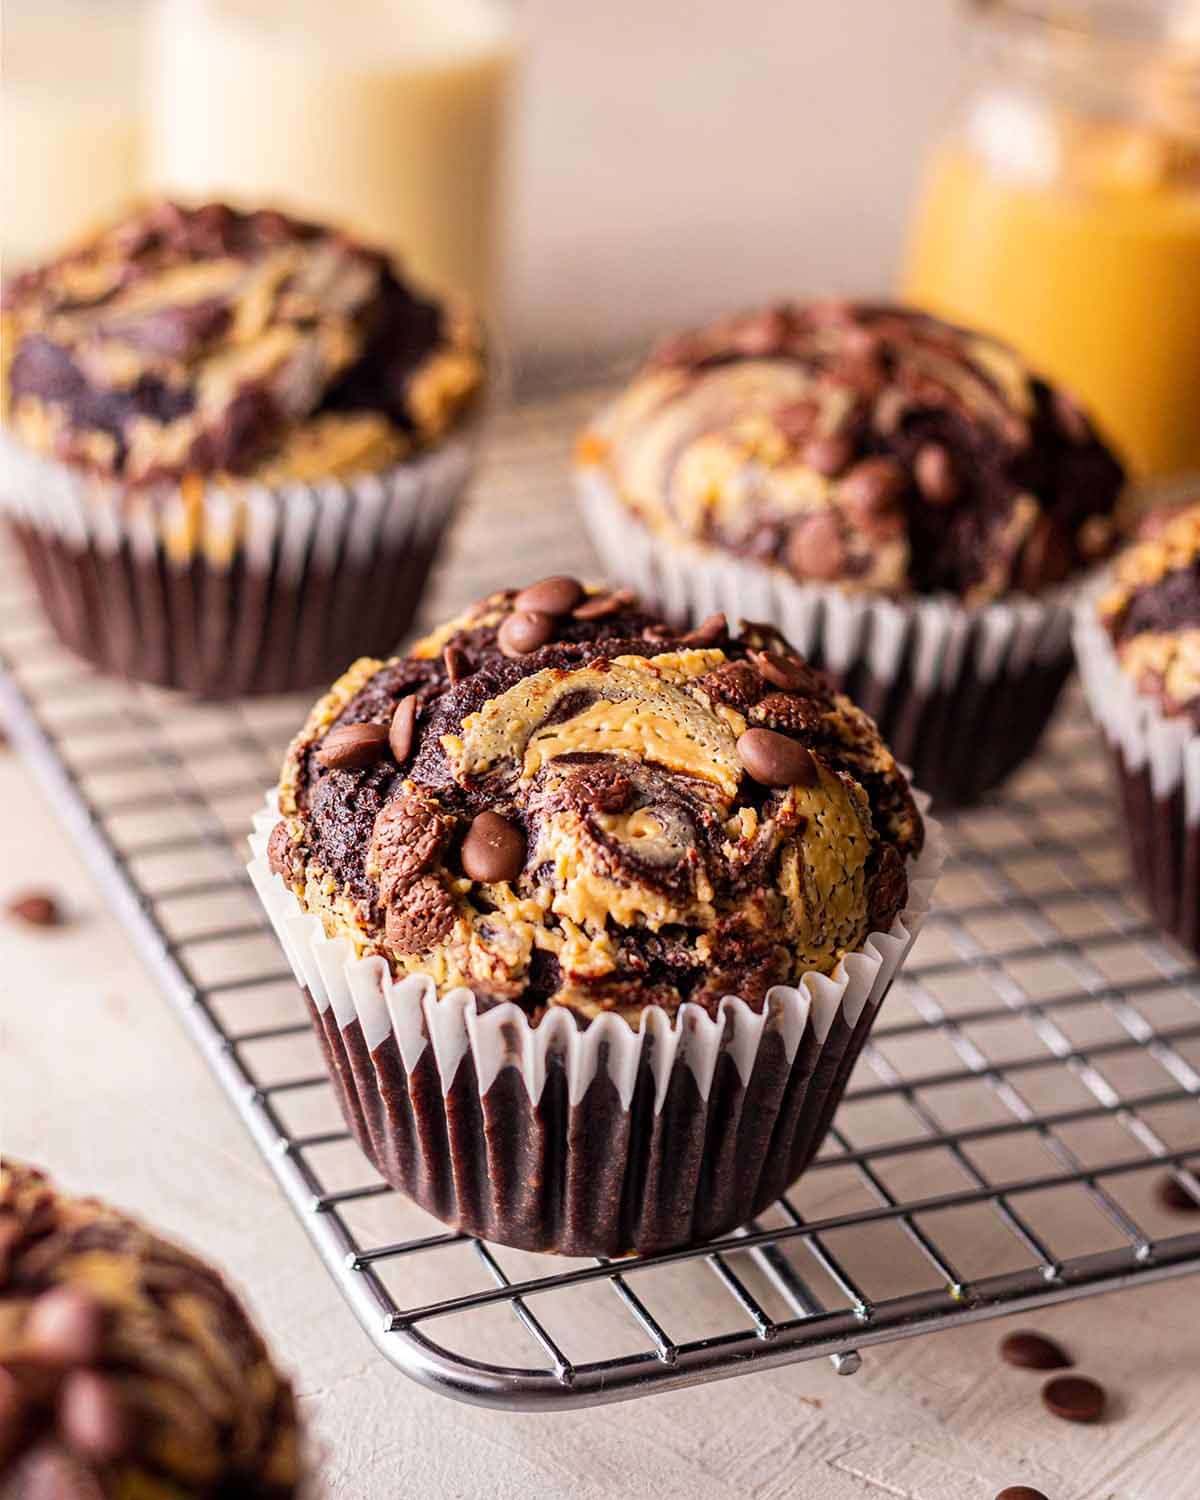 Close up of chocolate peanut butter muffin on wire rack. Muffin has swirl of peanut butter and mini chocolate chips on top.